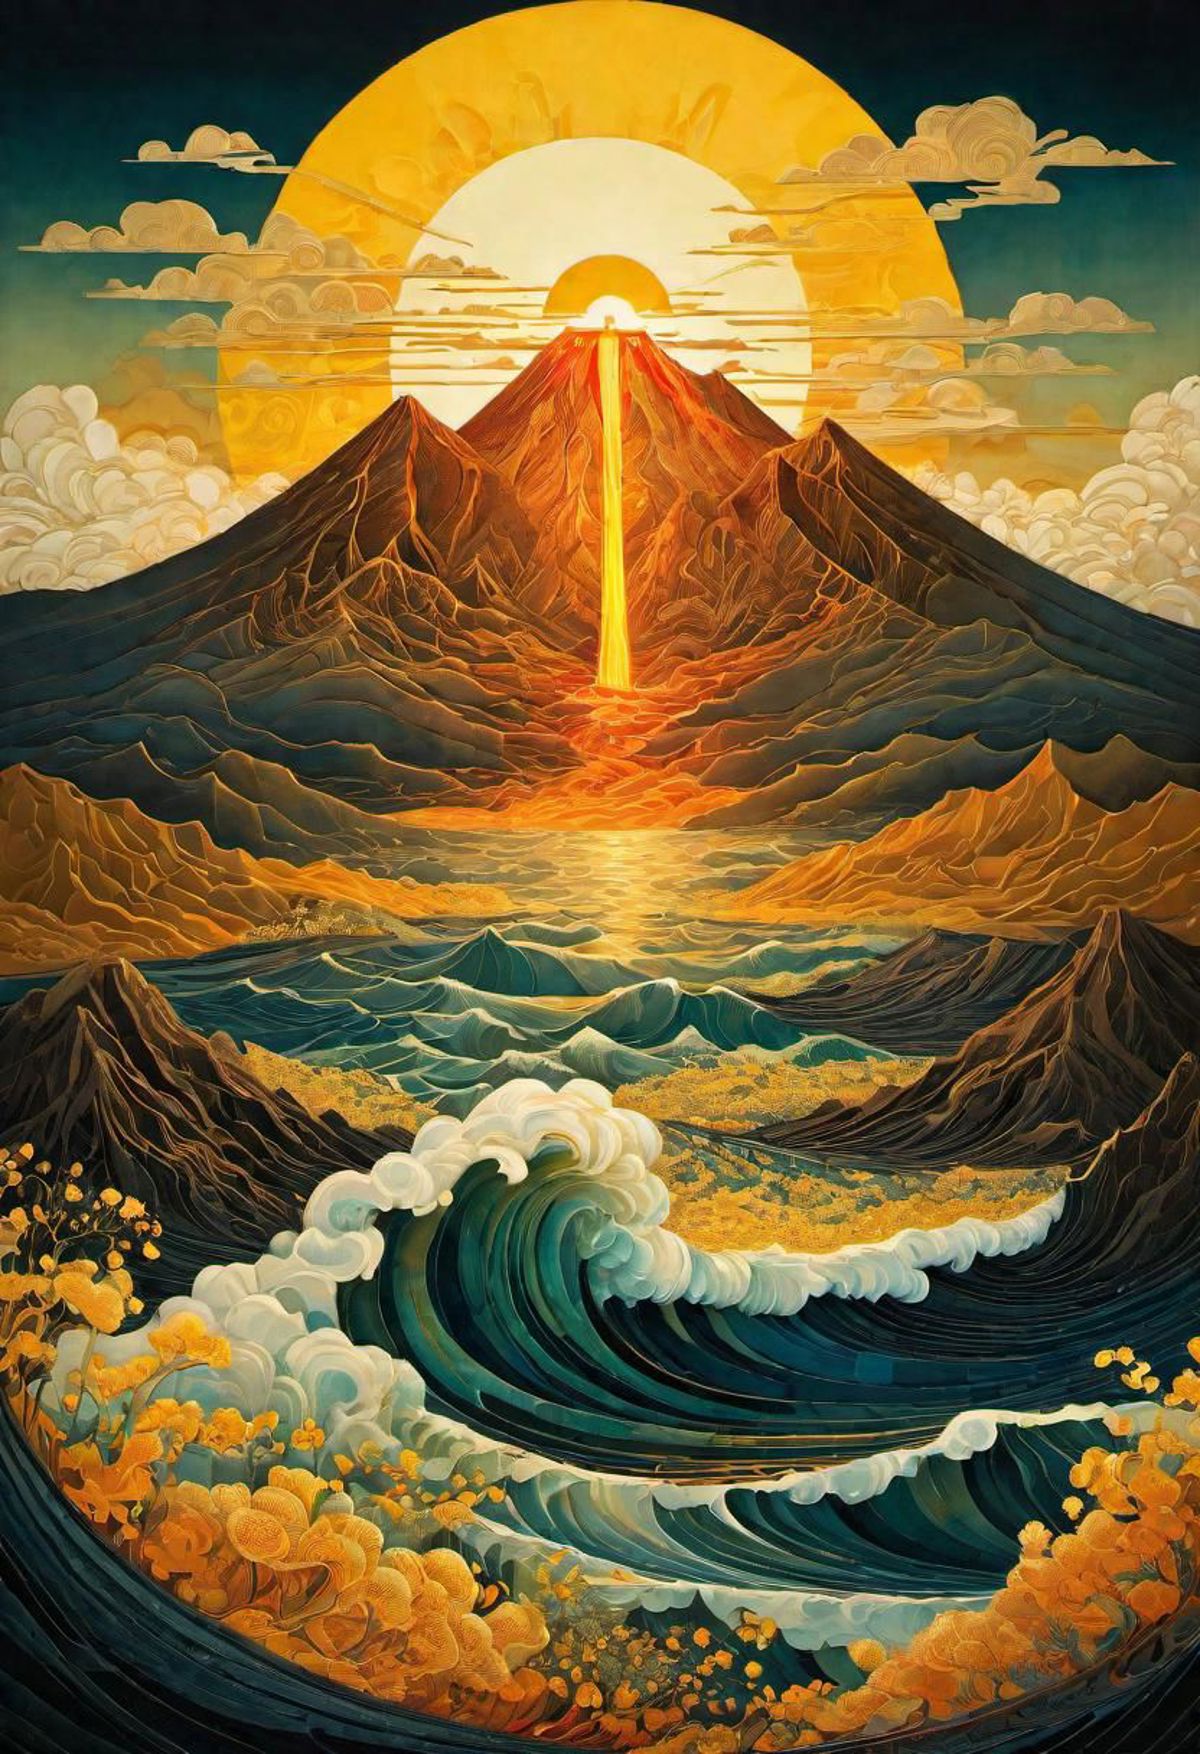 A painting of a volcano and ocean with a sun in the background.